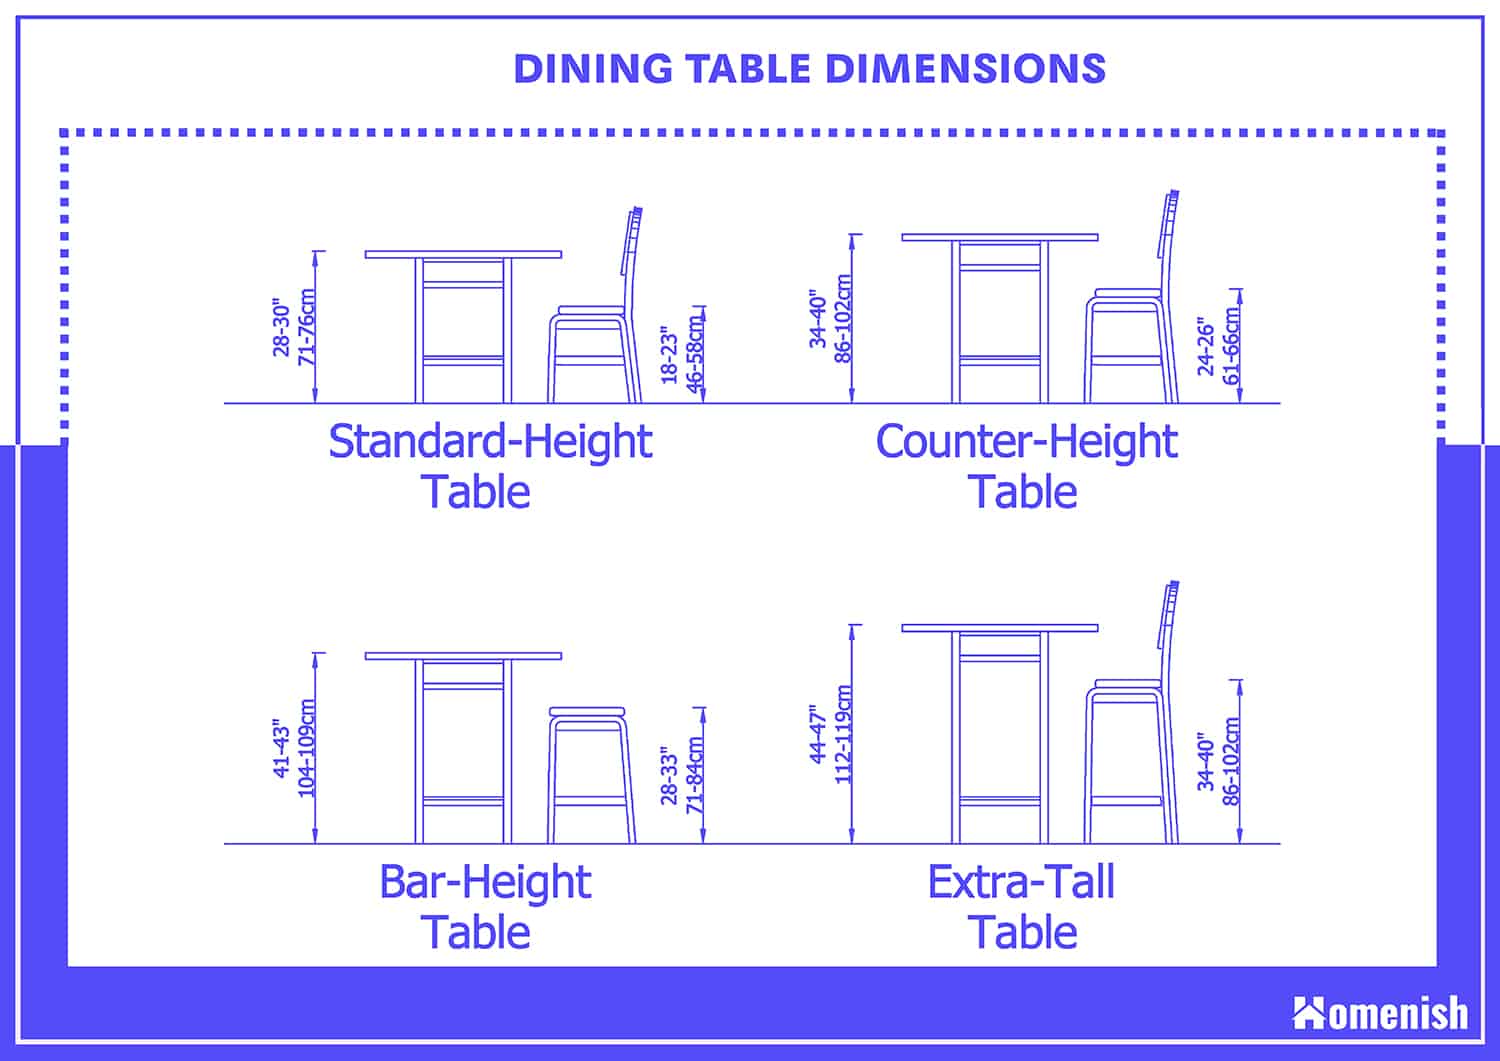 Standard Dining Table Dimensions, How Wide Is A Normal Dining Room Table